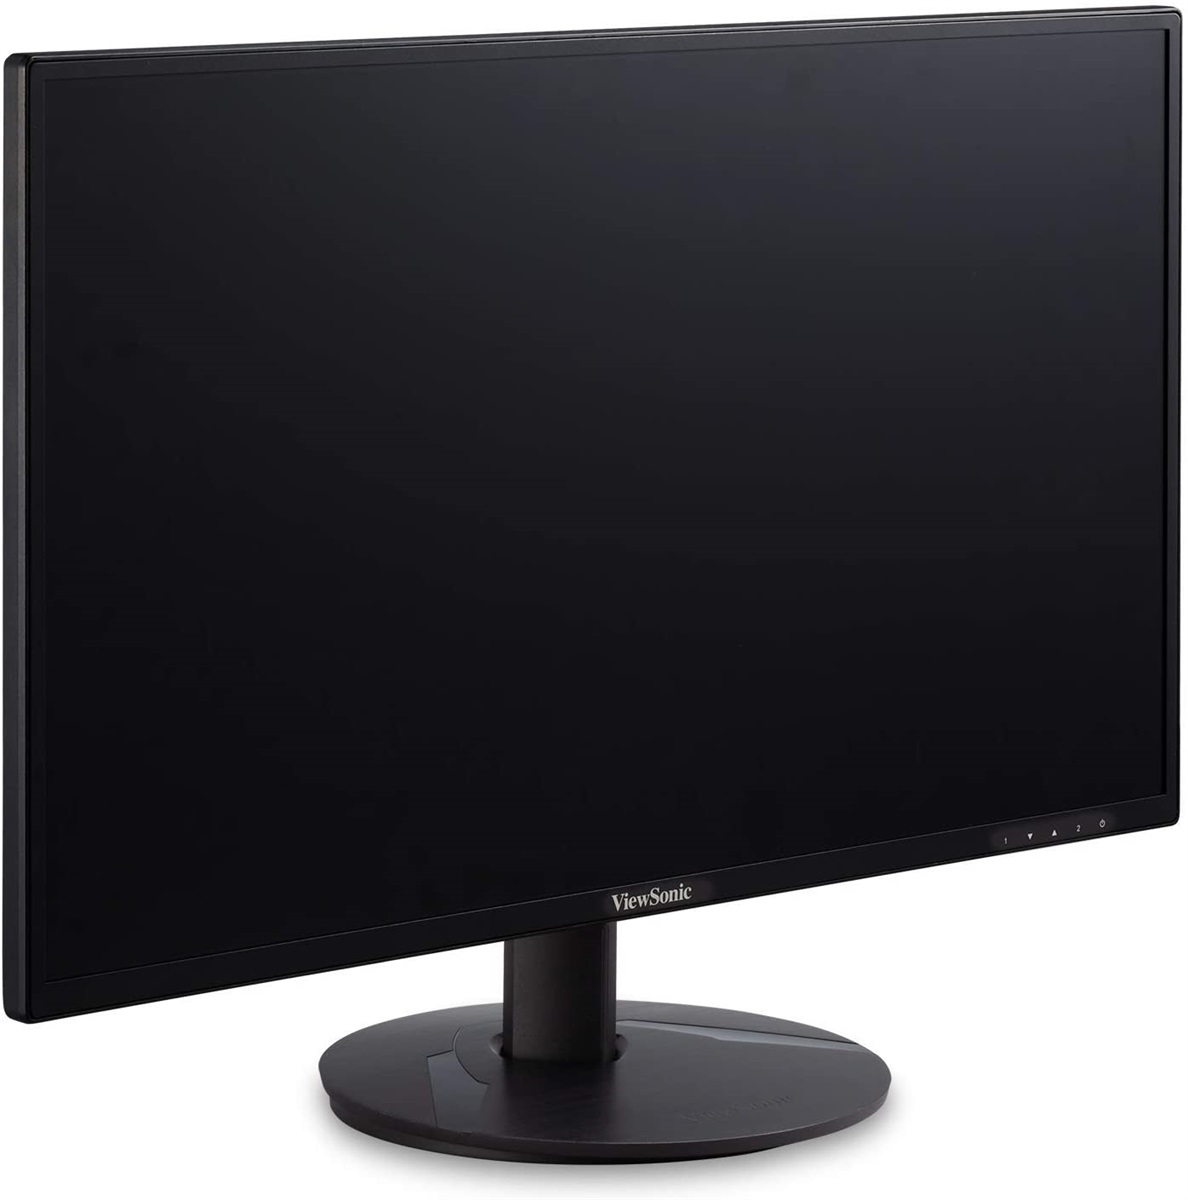 ViewSonic TD2455 24” In-Cell Touch Monitor Price in Pakistan - TechGlobe.pk